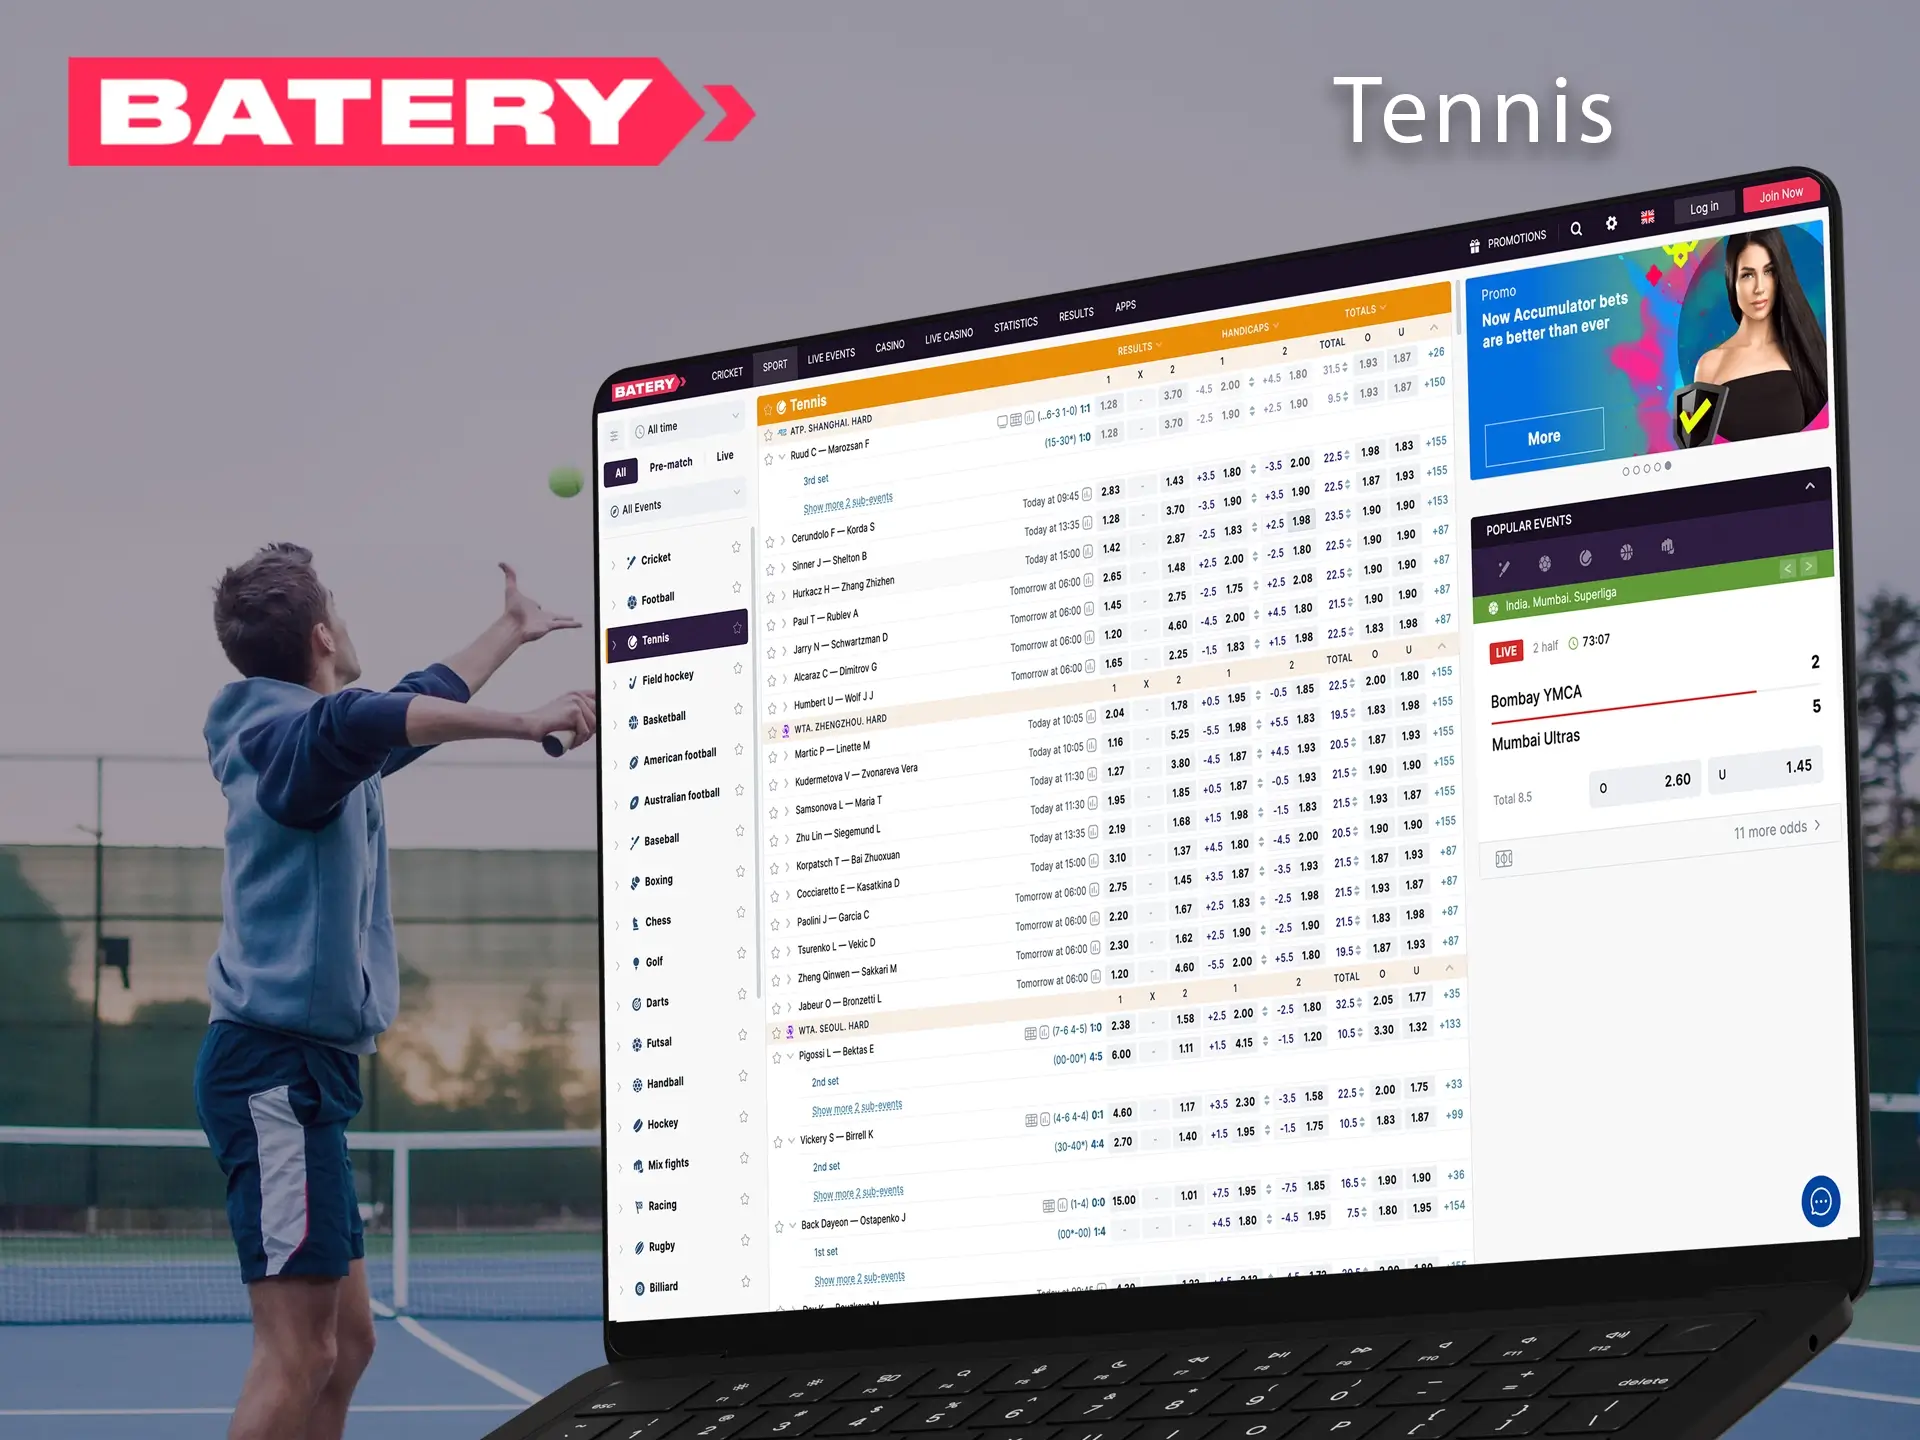 At Batery you will find the most important tennis activities and tournament events.